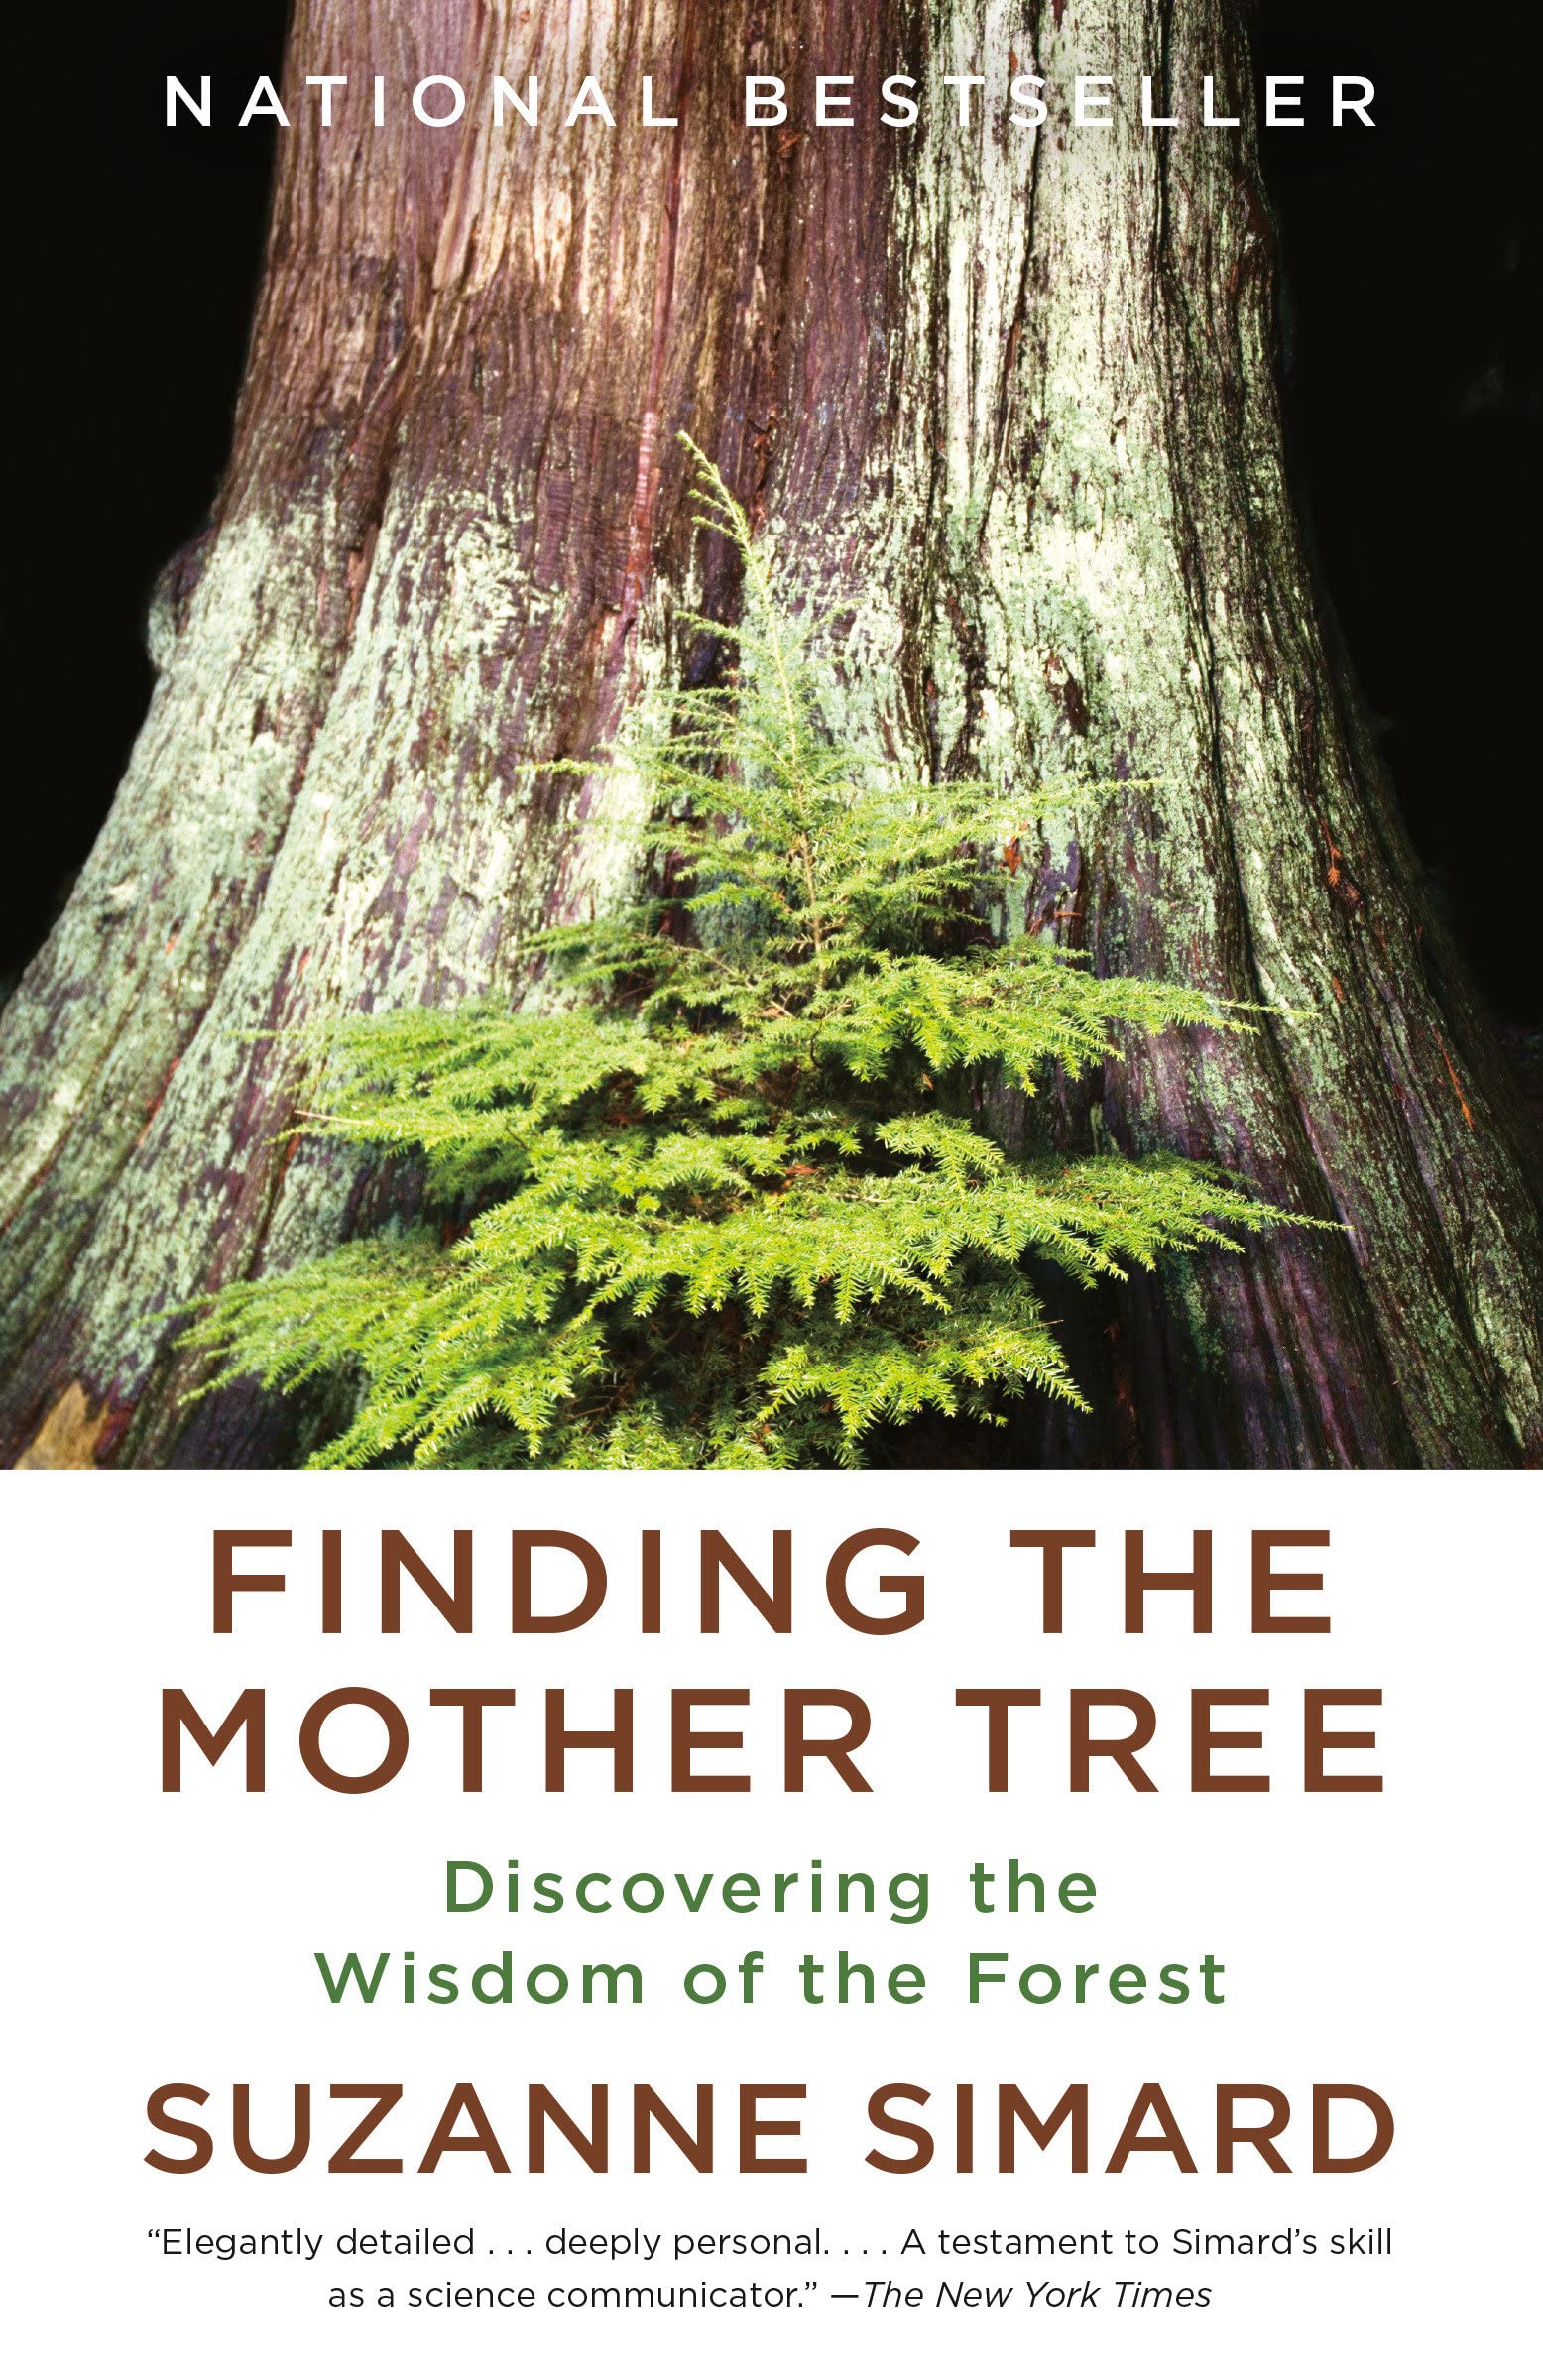 Finding the Mothe Tree